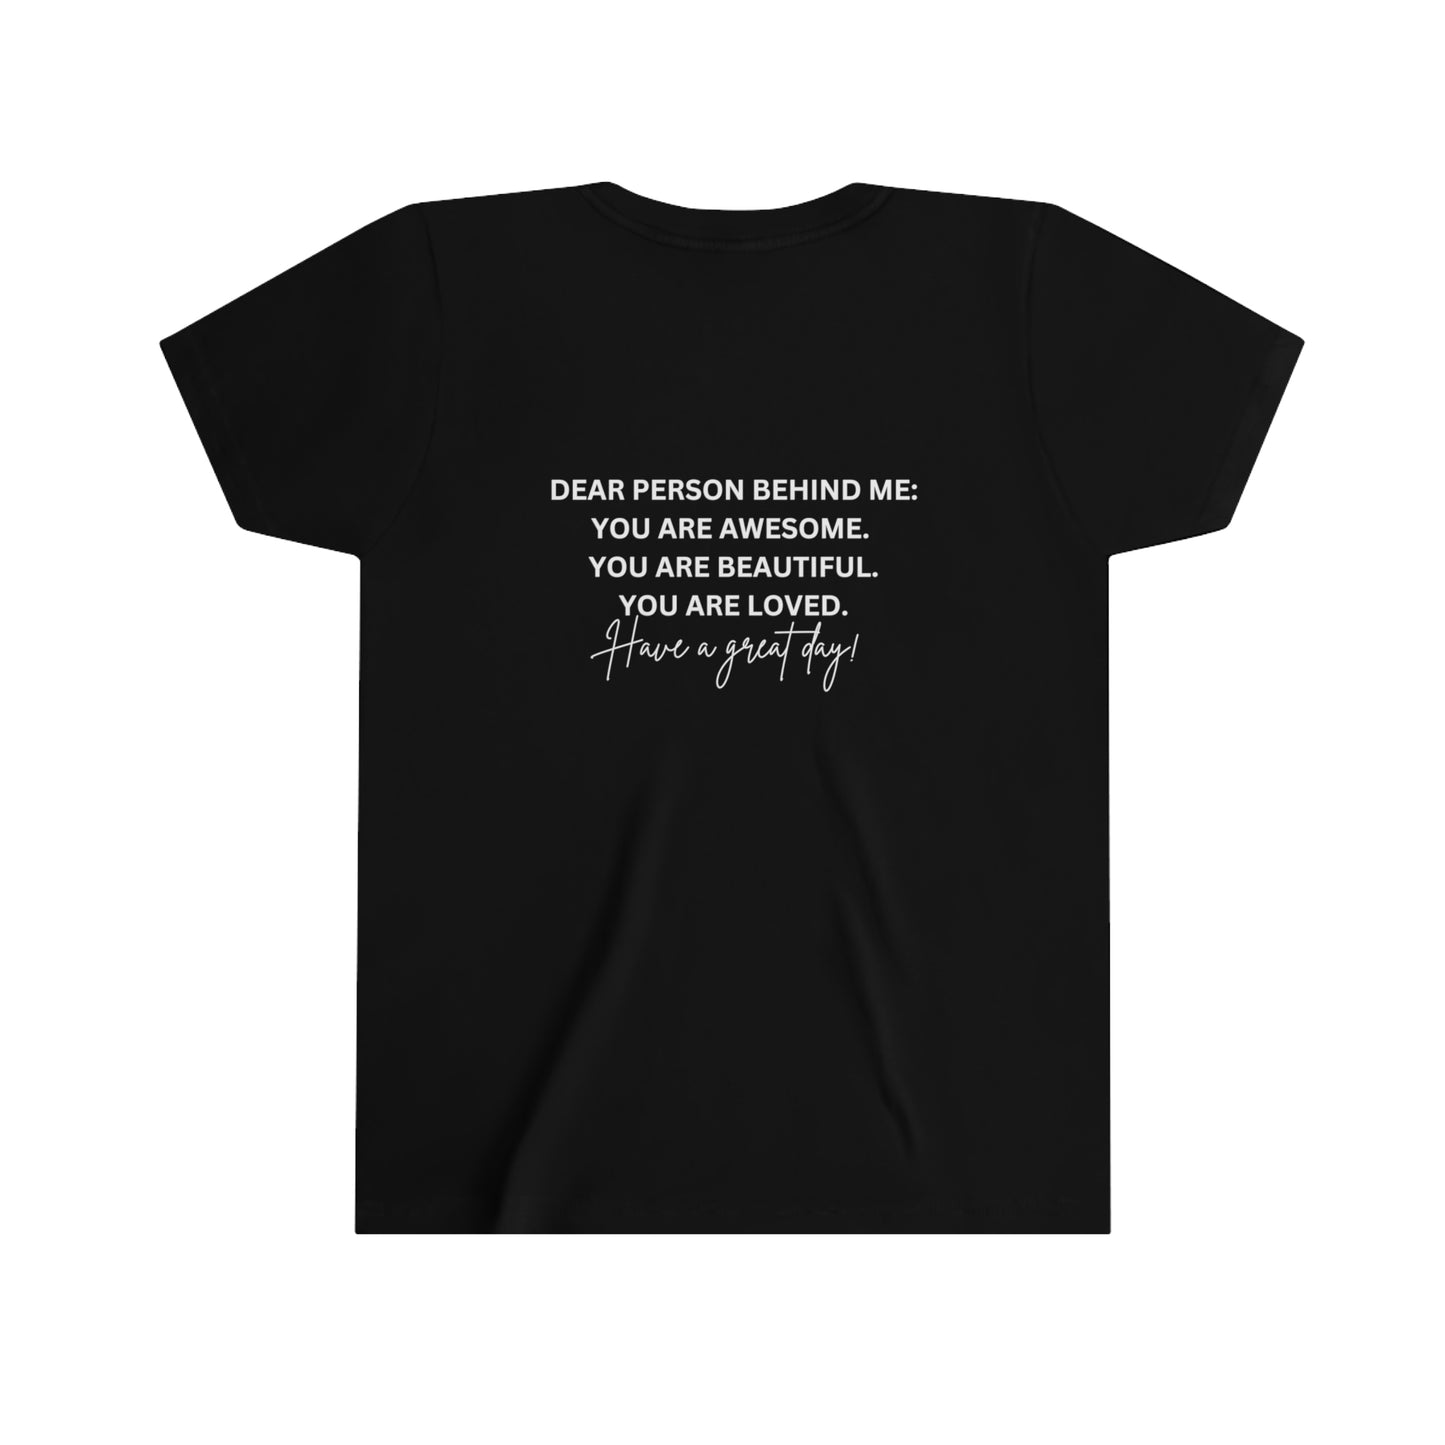 You Got This Youth Tee